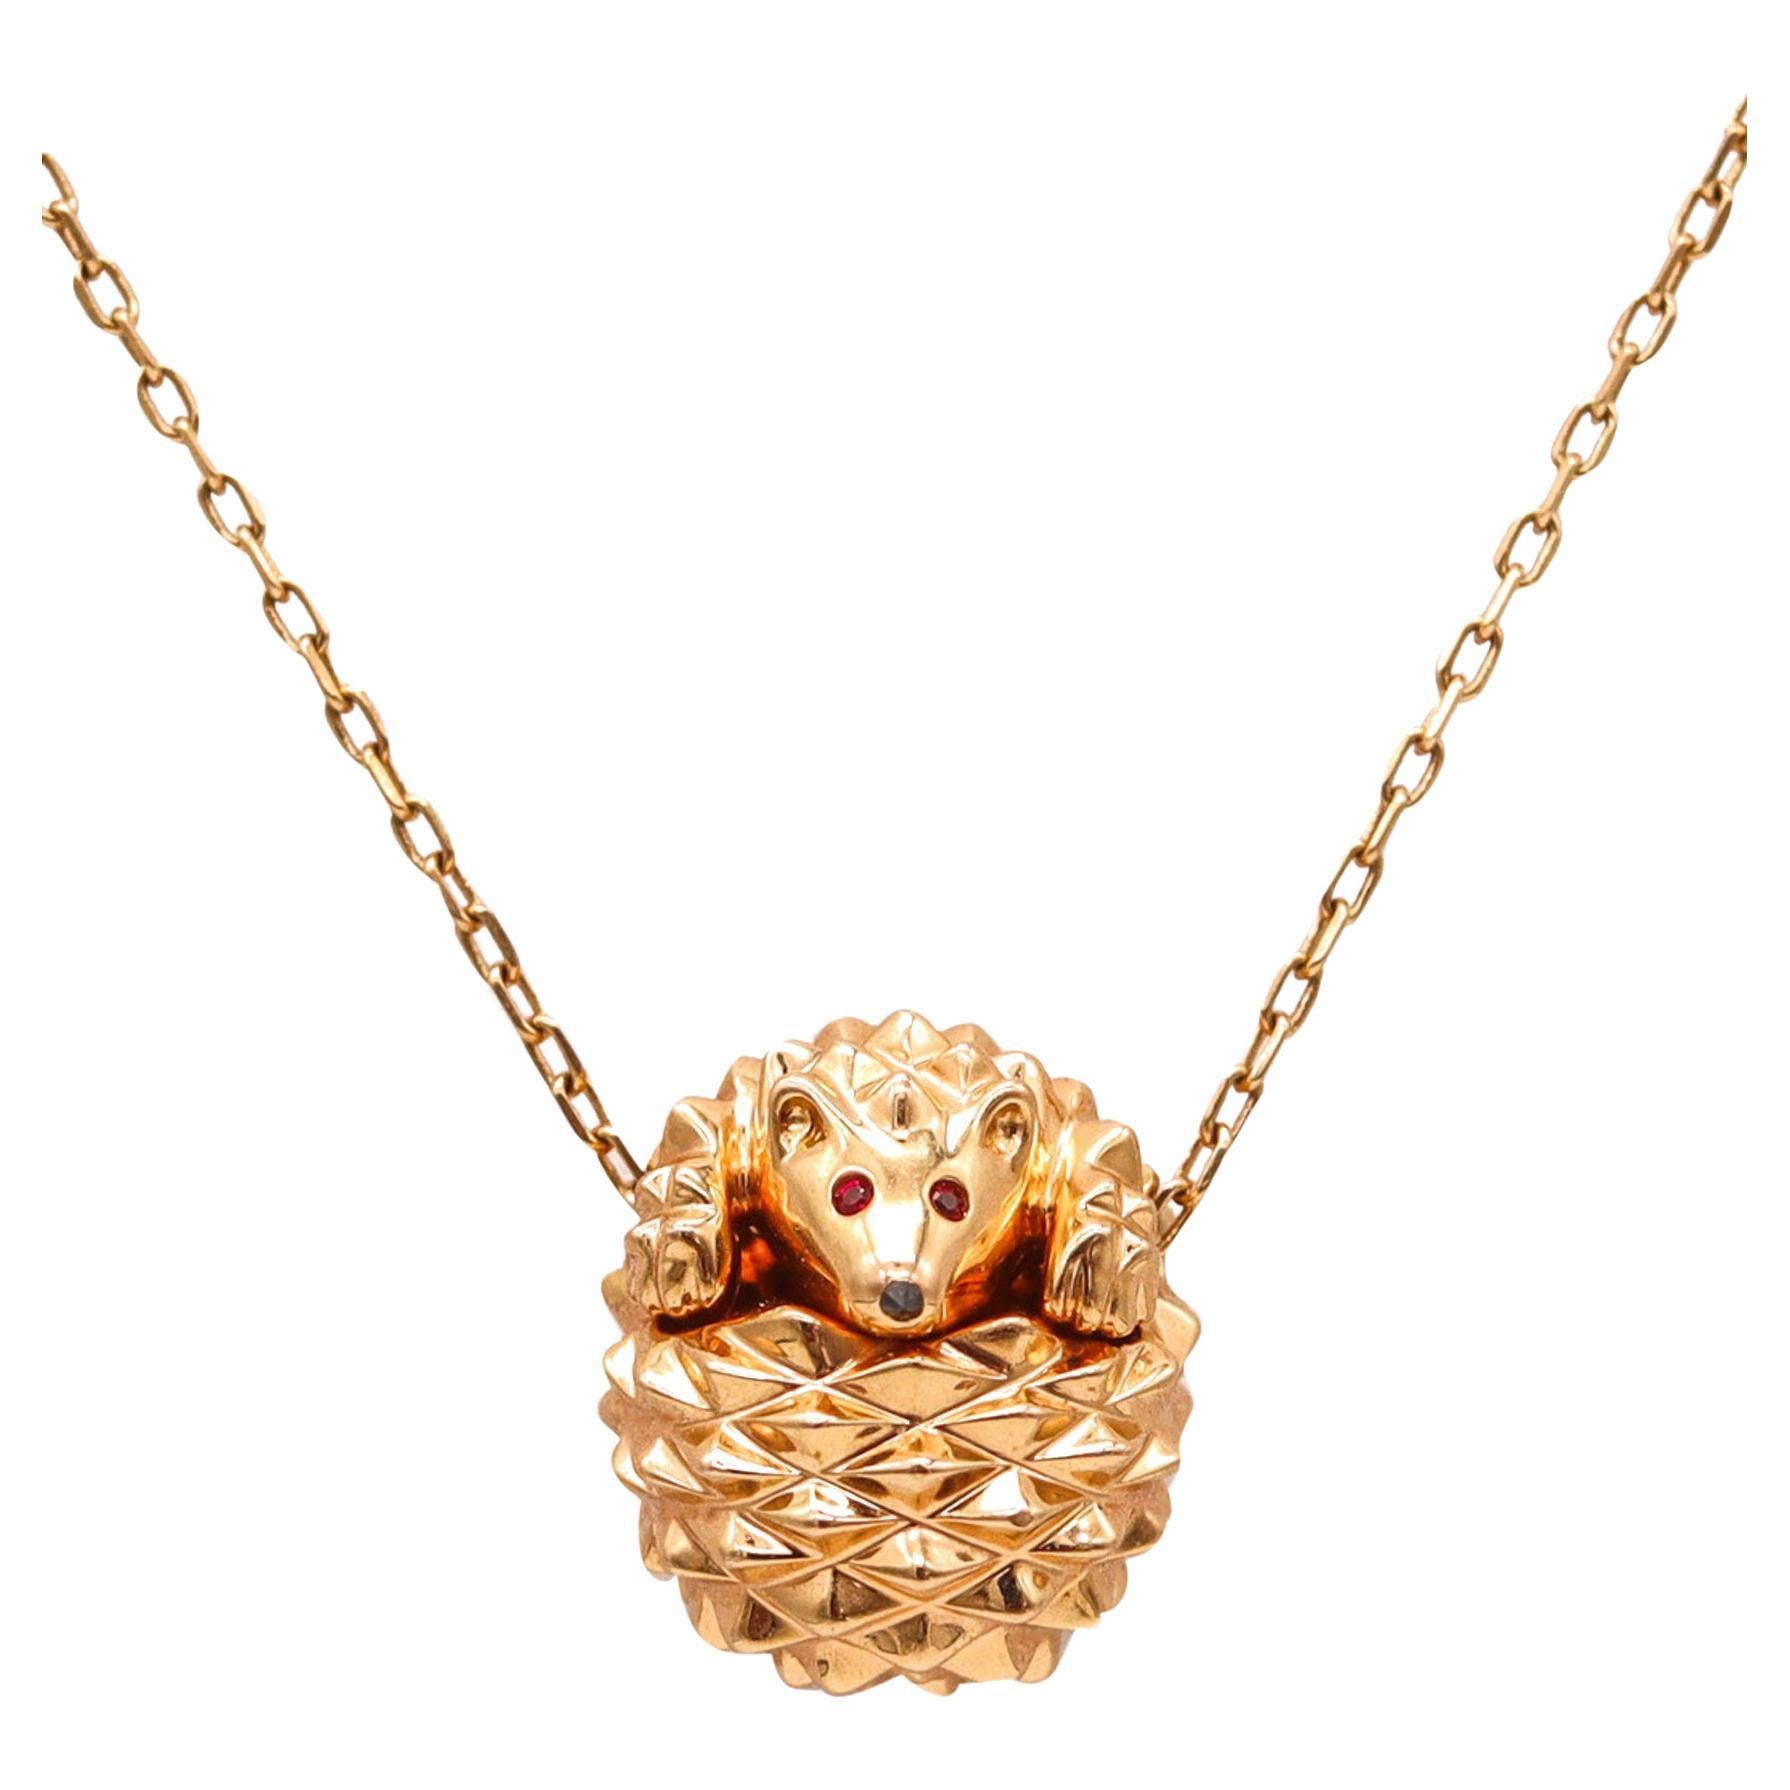 Boucheron Paris Textured Porcupine Necklace In 18Kt Yellow Gold With Two Rubies